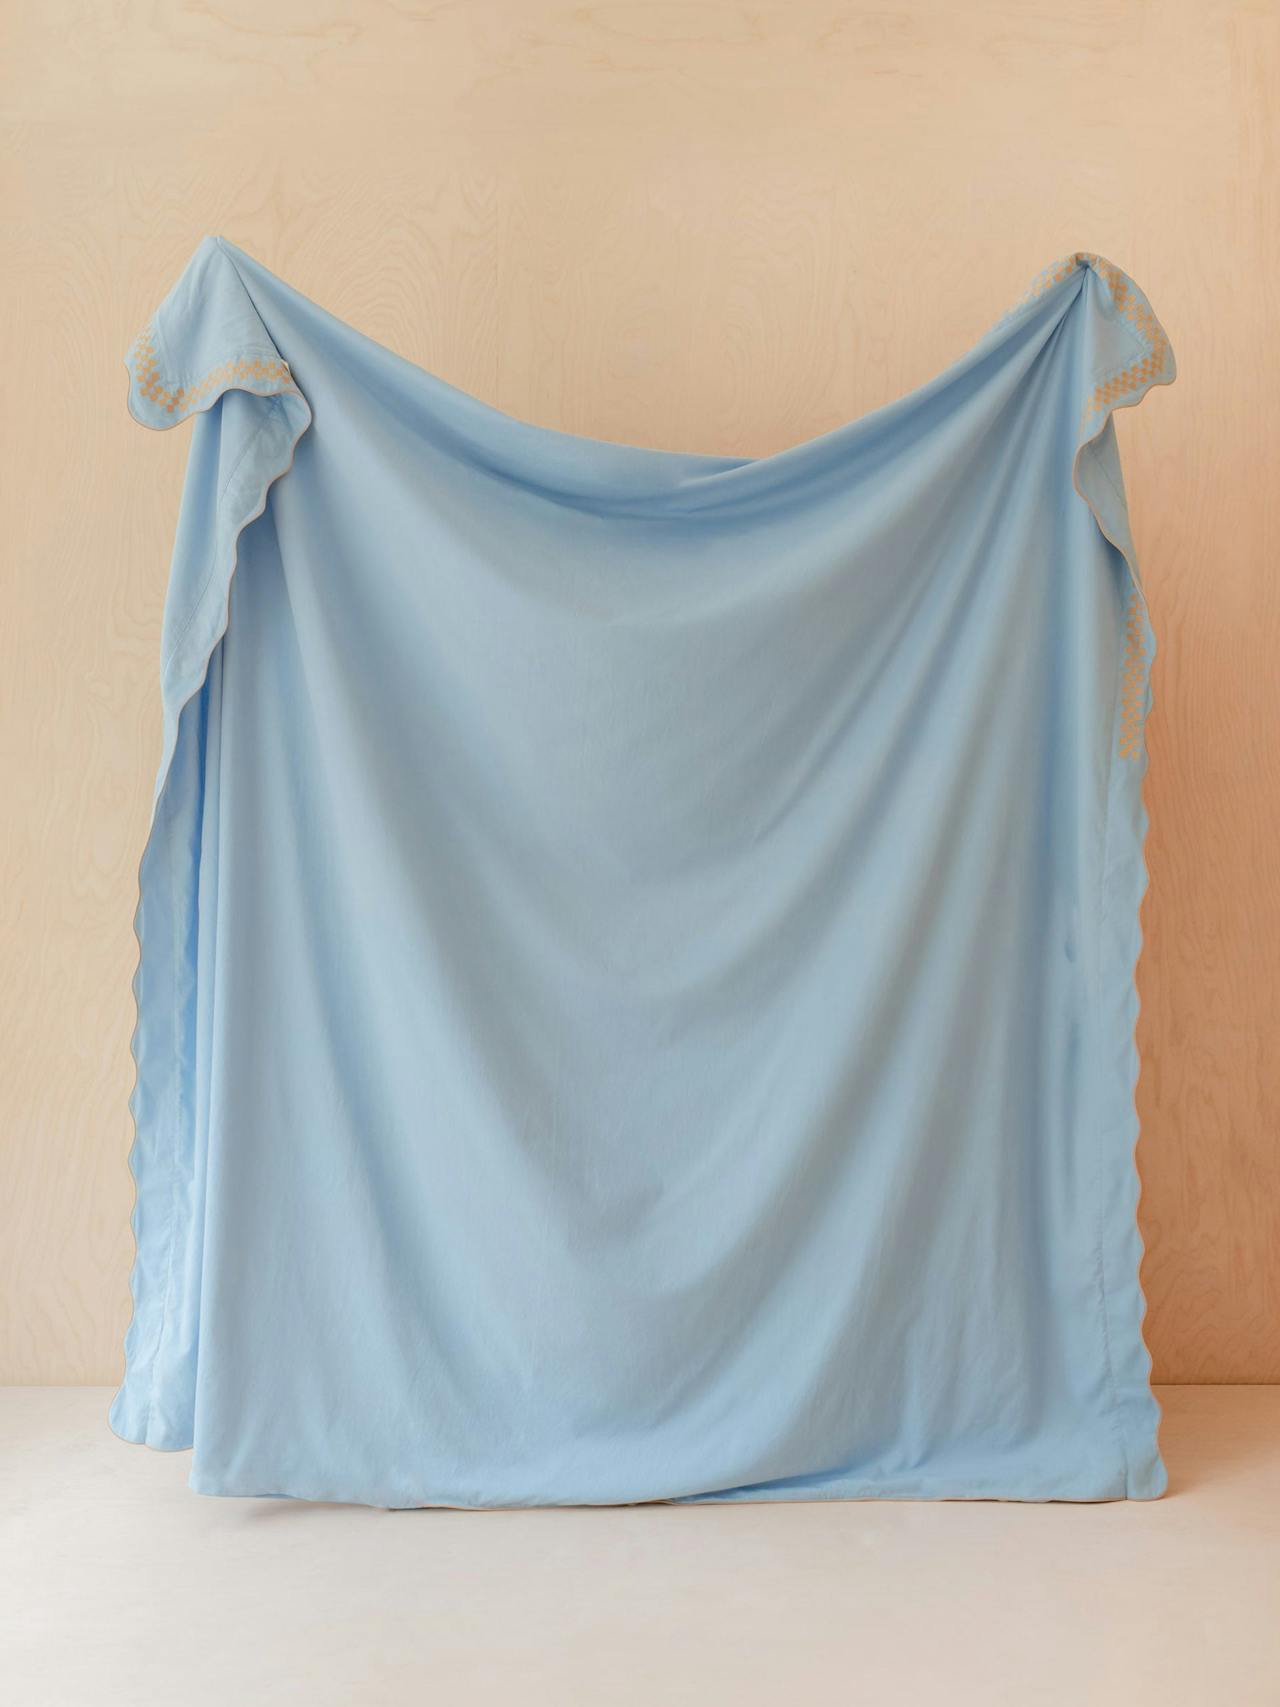 Cotton and linen duvet cover in blue